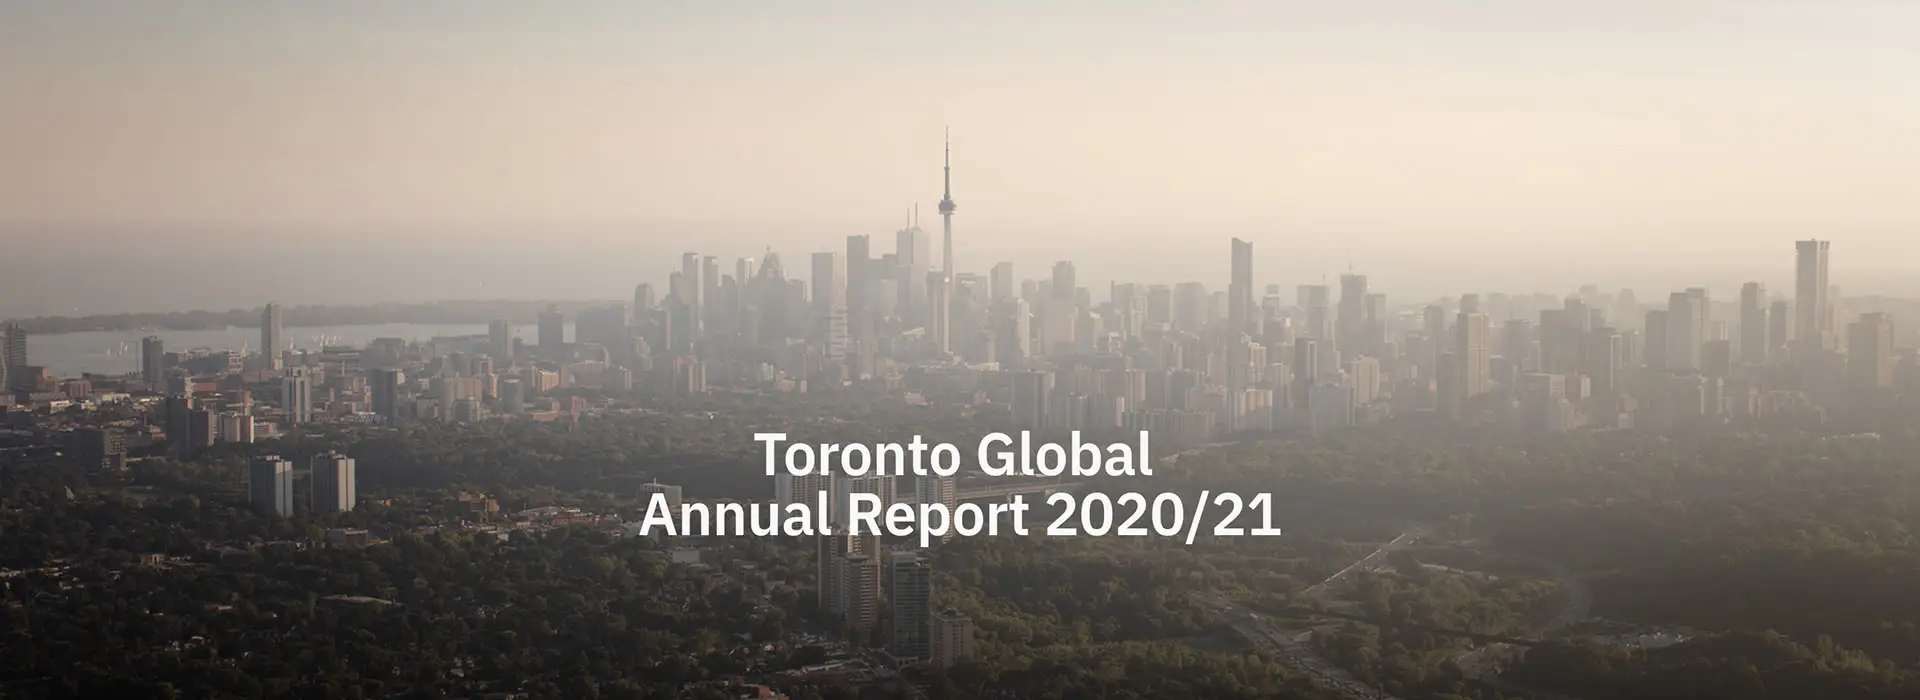 This is a Comeback Story: Toronto Global is Championing the Toronto Region’s Economic Recovery